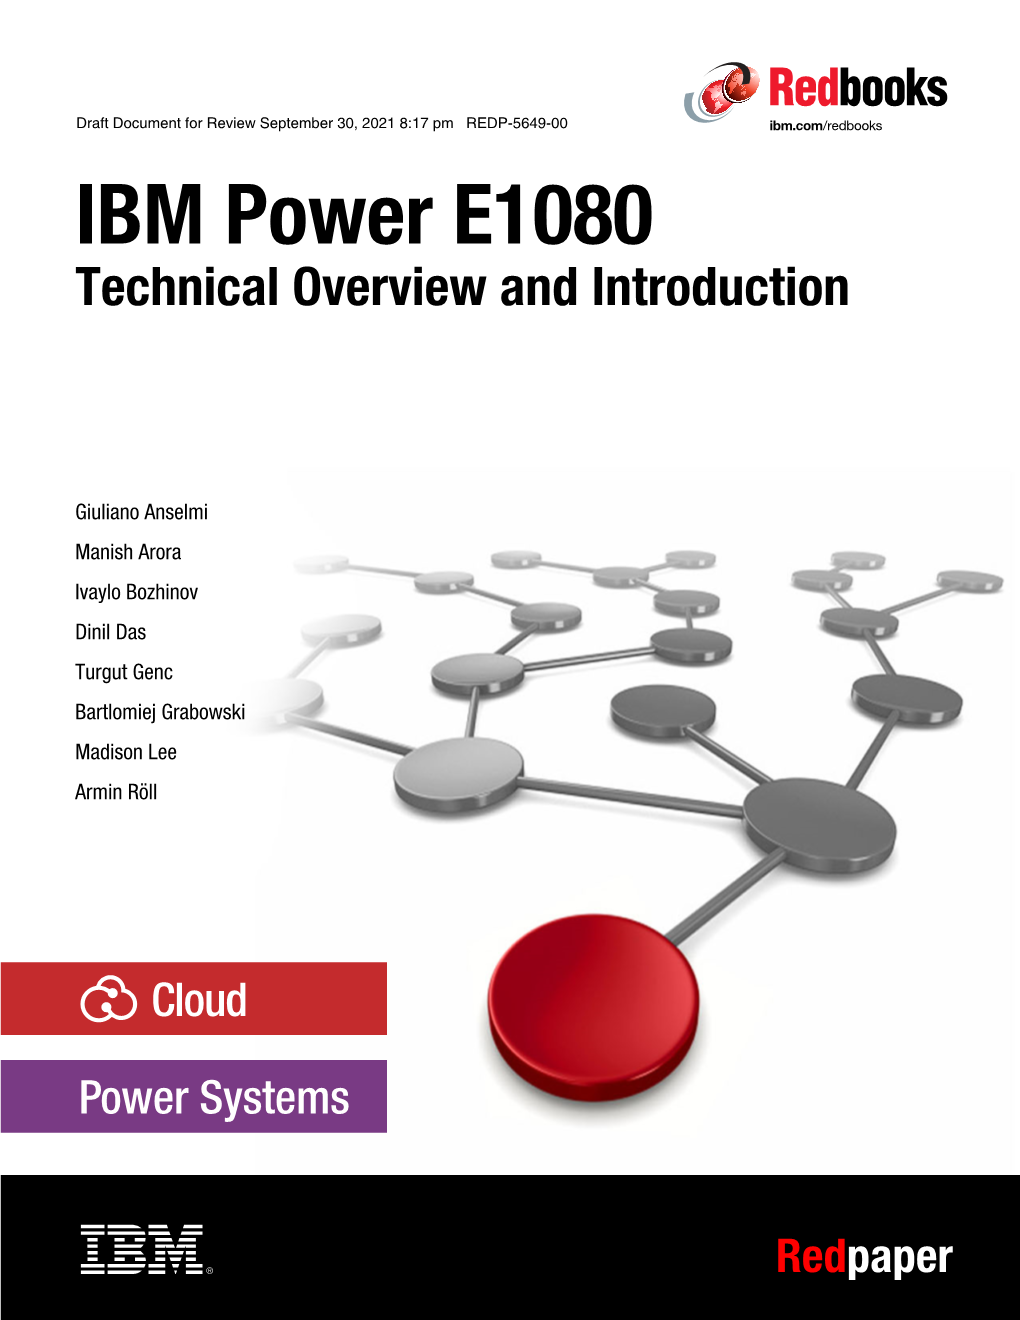 IBM Power E1080 Technical Overview and Introduction